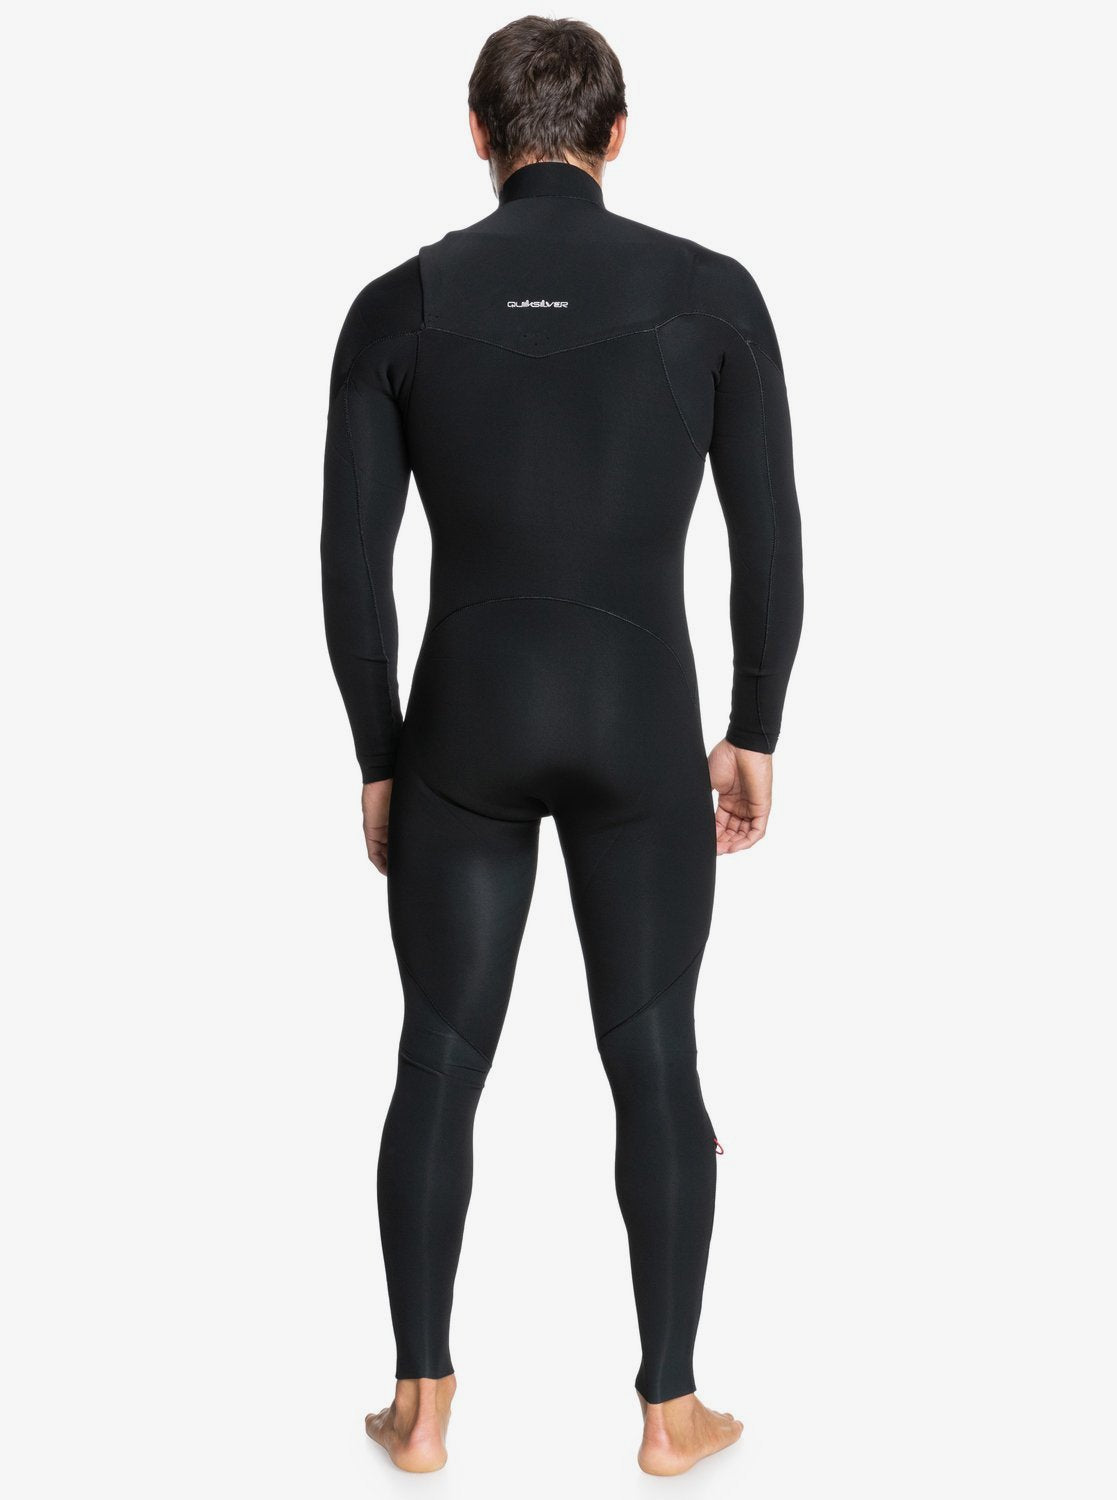 Quiksilver 5/4/3 Everyday Sessions Chest Zip Wetsuit